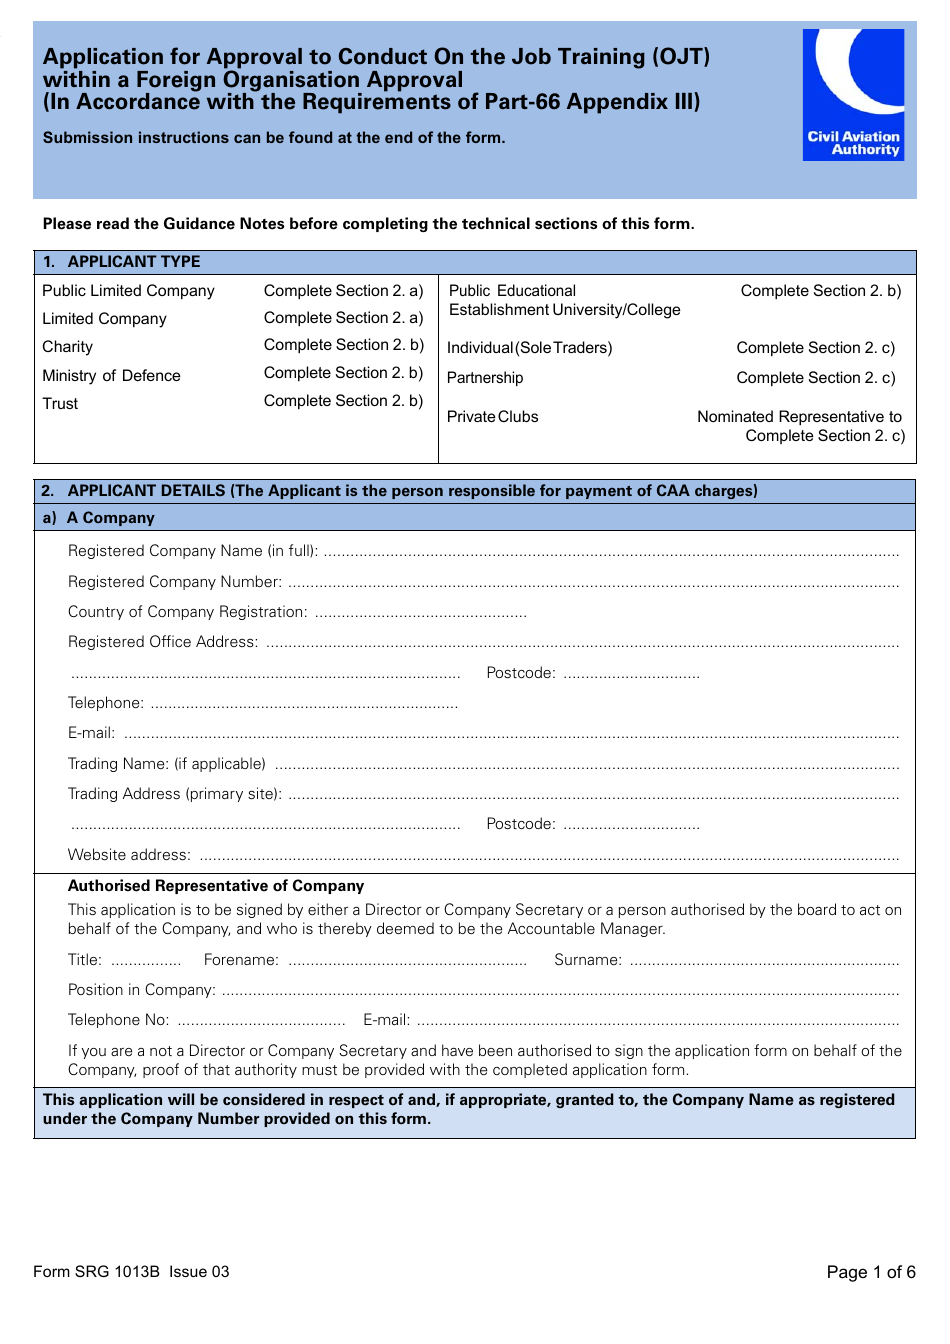 Form SRG1013B Application for Approval to Conduct on the Job Training (Ojt) Within a Foreign Organisation Approval (In Accordance With the Requirements of Part-66 Appendix Iii) - United Kingdom, Page 1